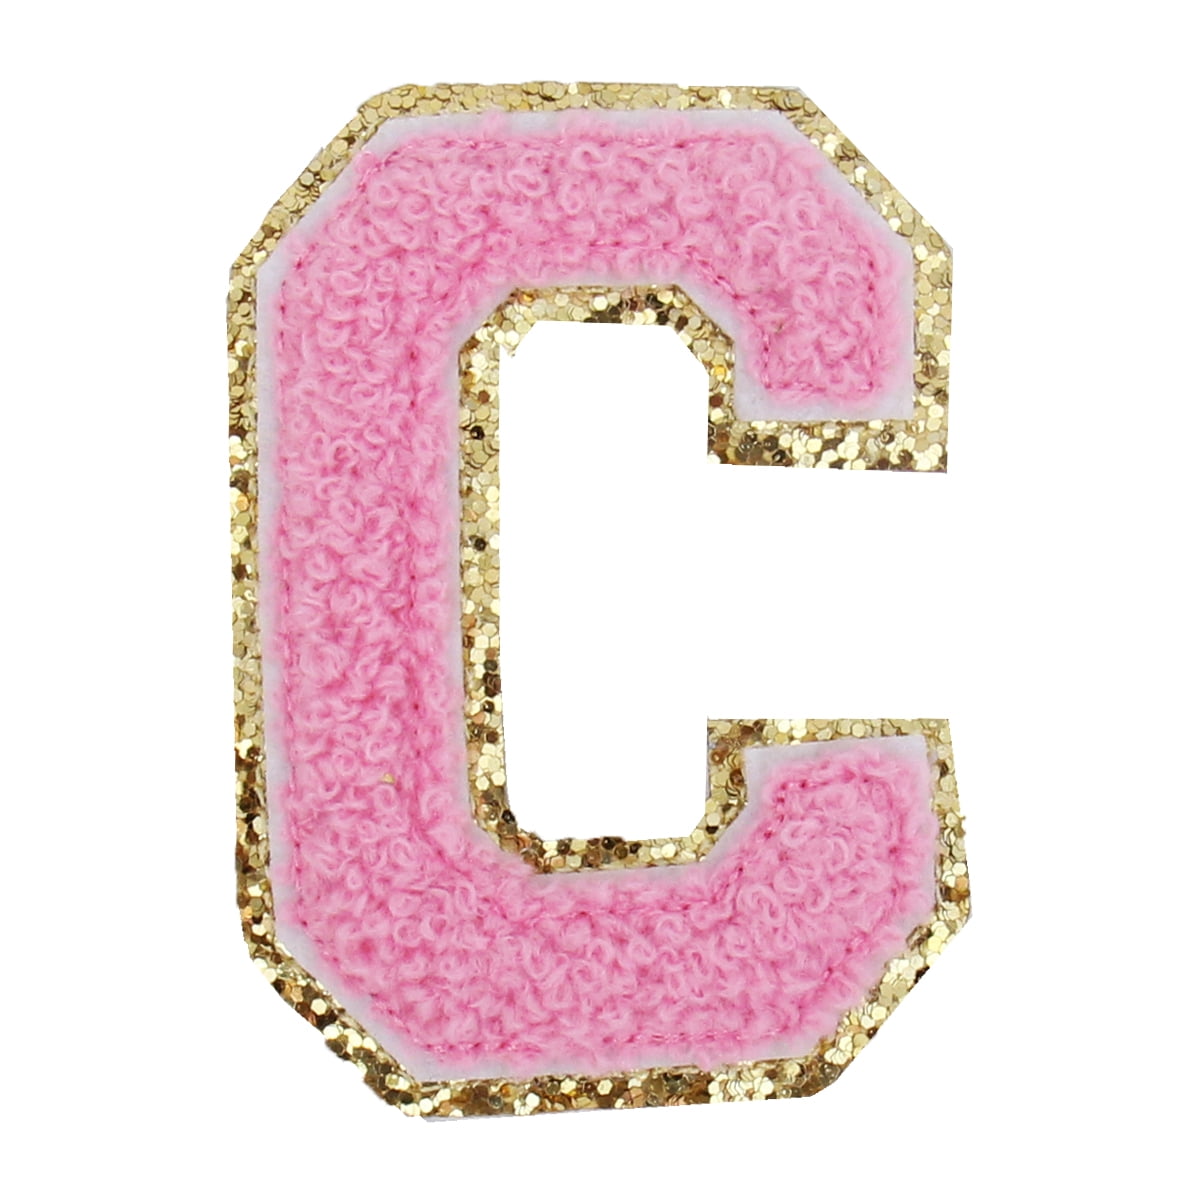 Jongdari Chenille Letter Patches Self Adhesive Letters,Iron on Letters for  Clothing, 26pcs Varsity Fuzzy Patch Glitter Stick - Pink